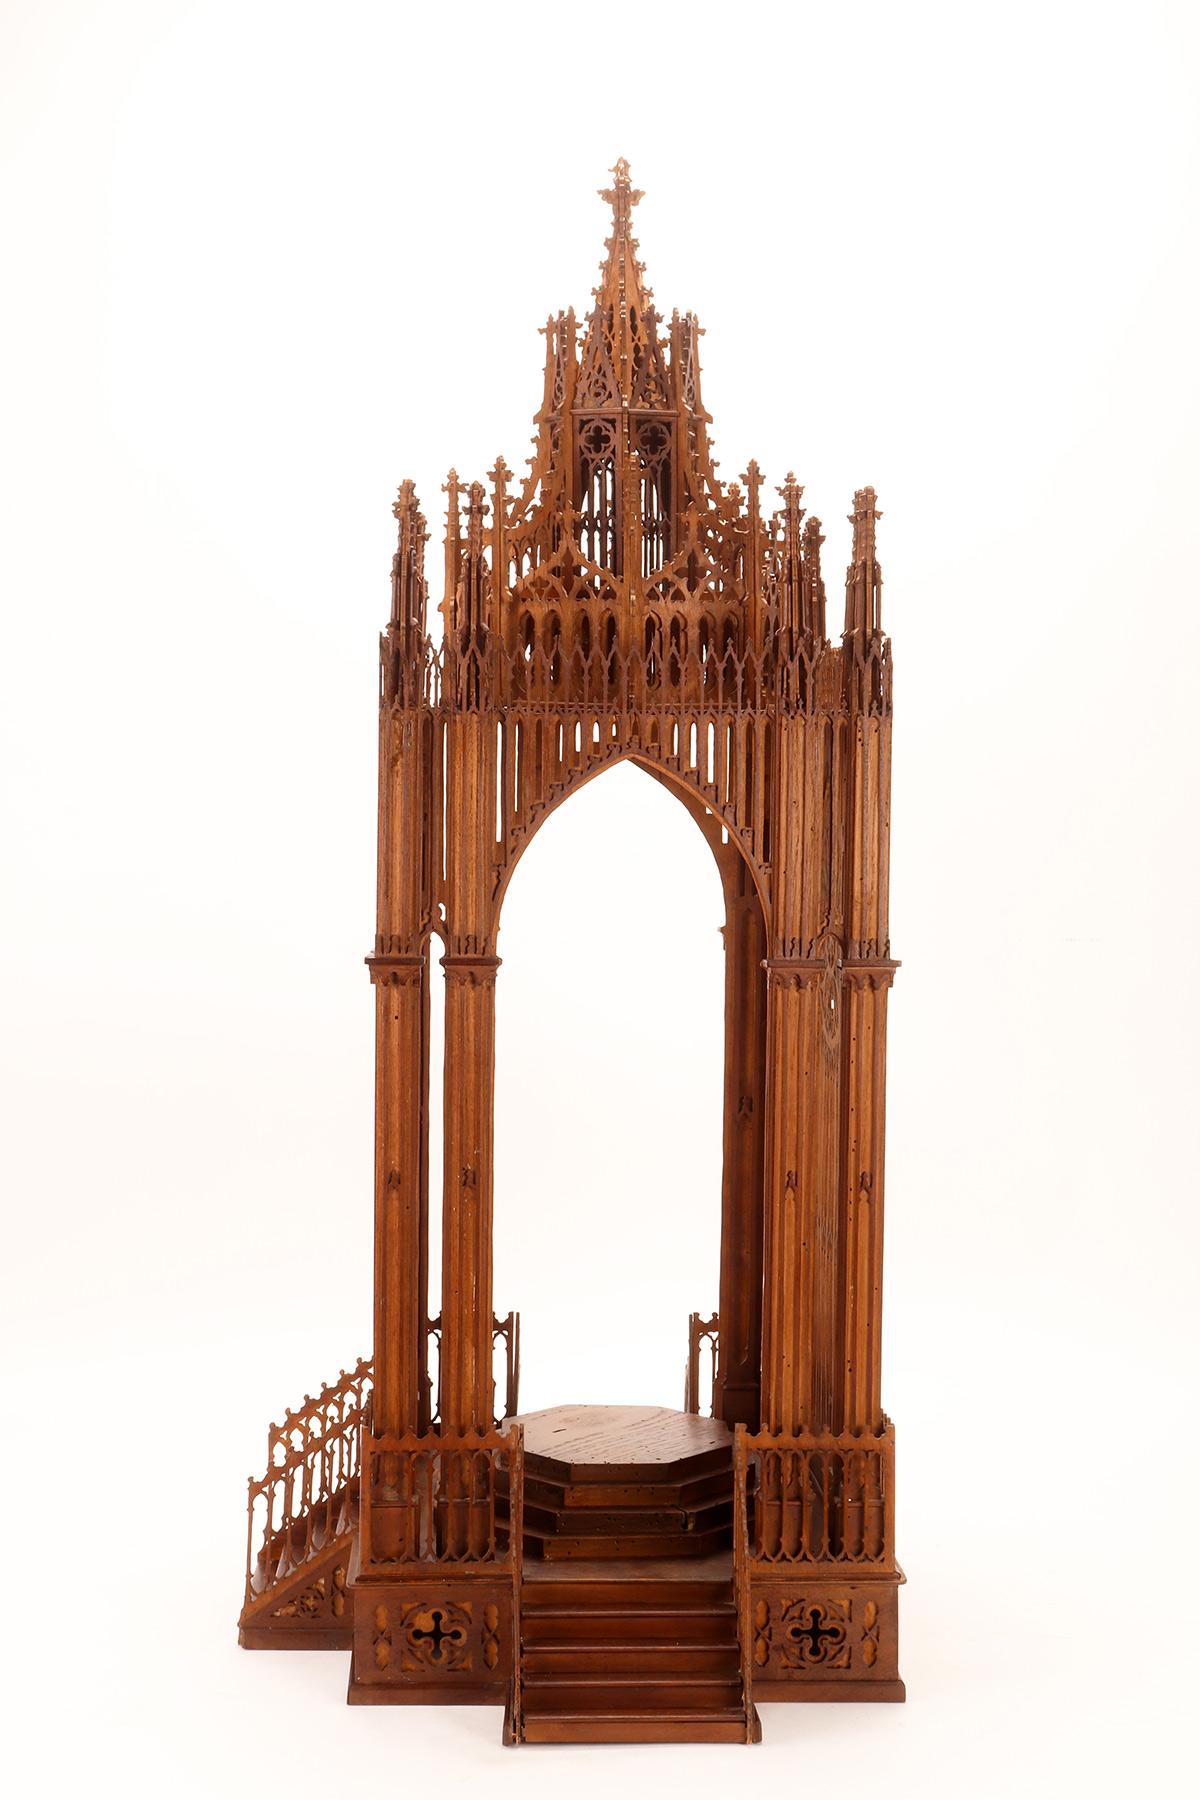 Throne for Eucharistic exposition. A sort of architectural shrine that was placed on the altar for the exposition of the Eucharist. the monstrance was placed in the center of the throne which in turn was placed on the tabernacle or on the highest